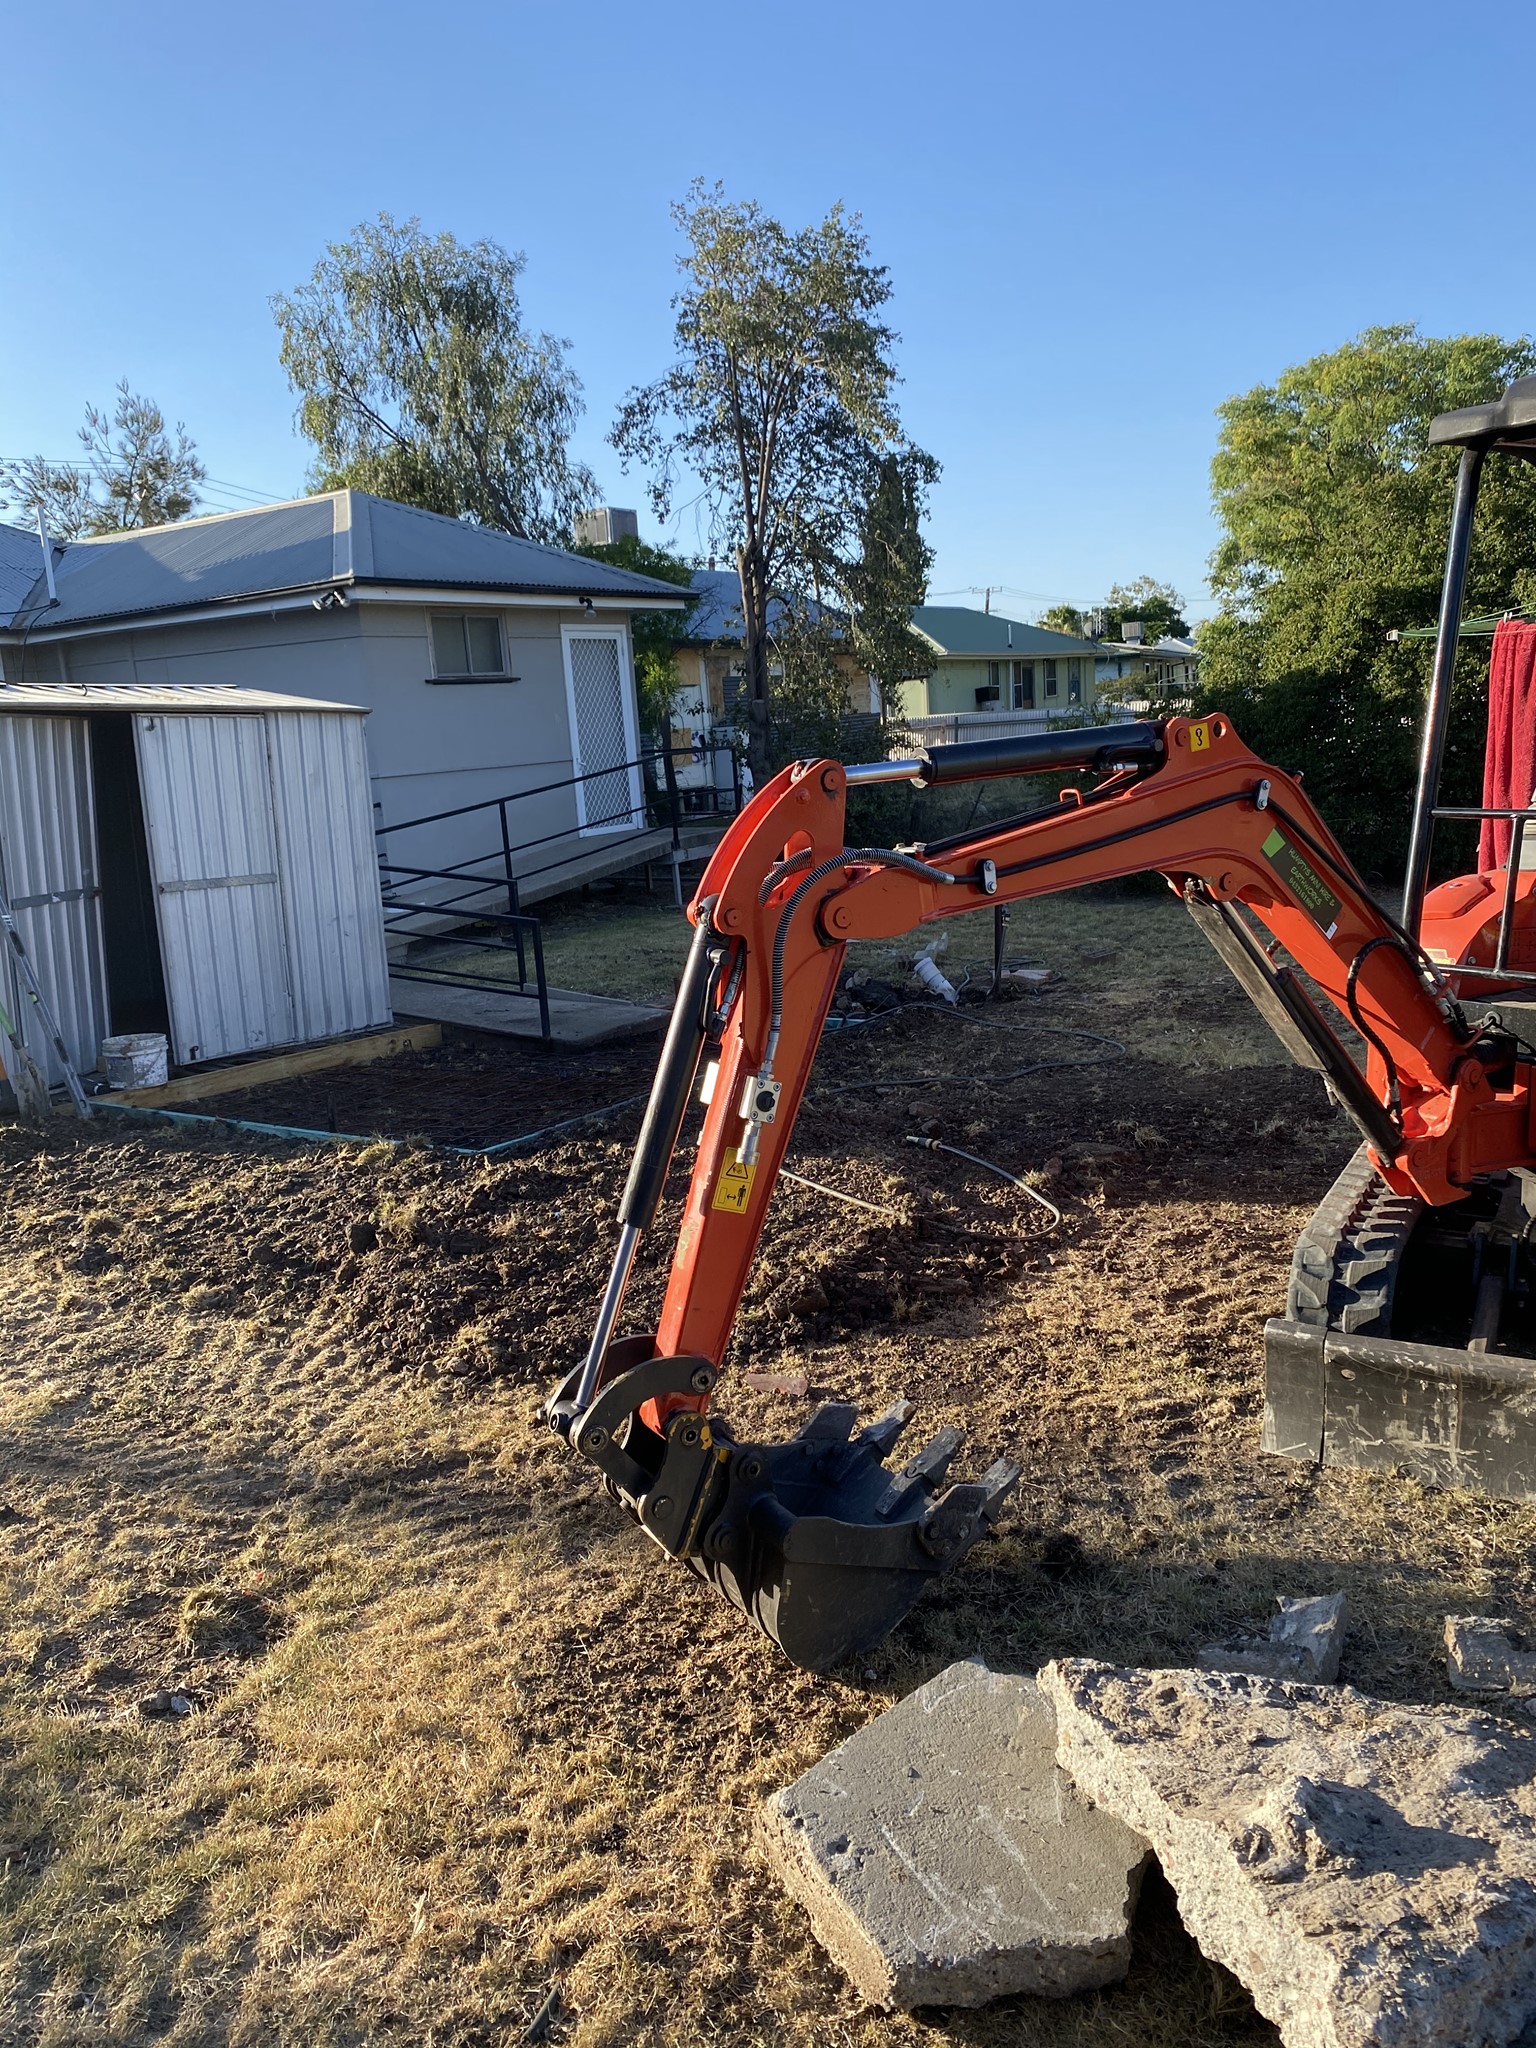 HCEM Group is a family owned business focused on providing quality affordable civil earthworks and maintenance services. Servicing residential and commercial properties.